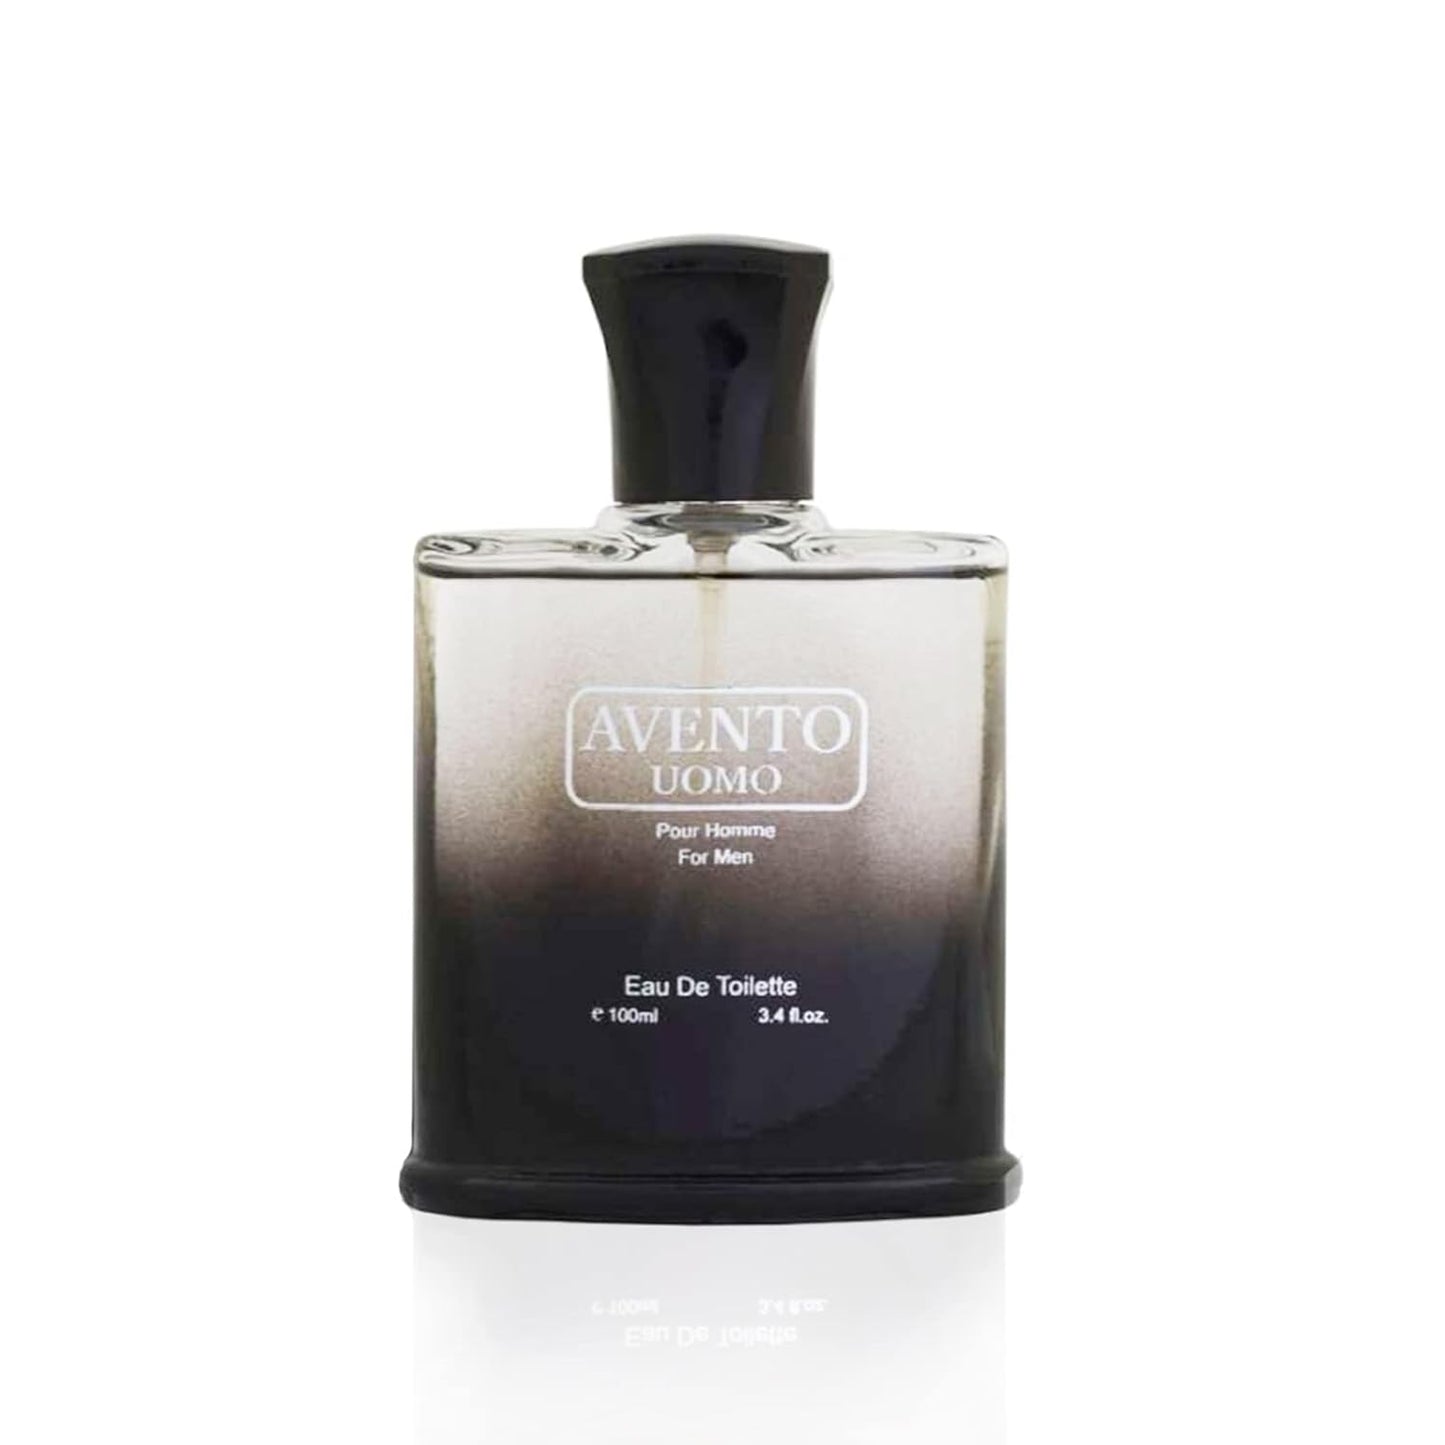 META-BOSEM Avento Uomo, Men's Cologne Eau de Toilette Natural Spray - Masculine Aroma Notes - Fresh Scent - Great Holiday Gift - for All Day Use - a Classic Bottle, 3.4 Fluid Ounce/100Ml